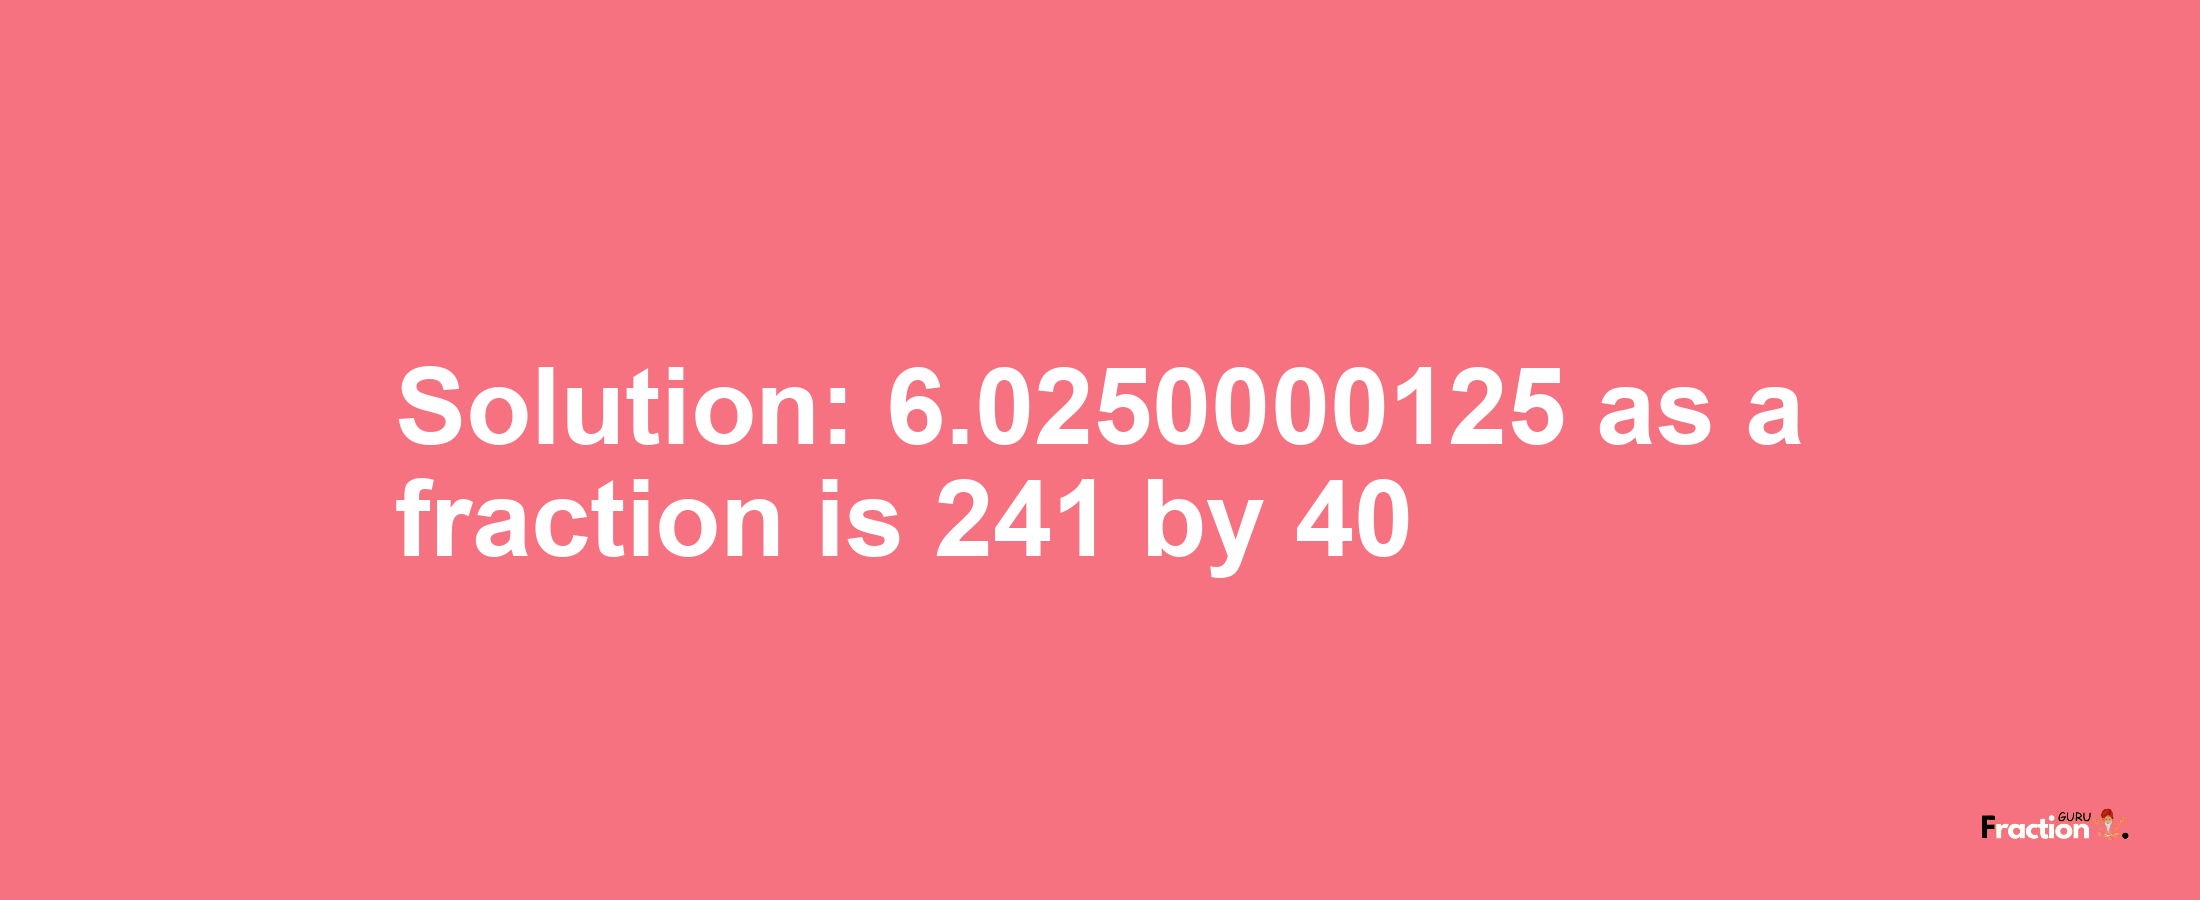 Solution:6.0250000125 as a fraction is 241/40